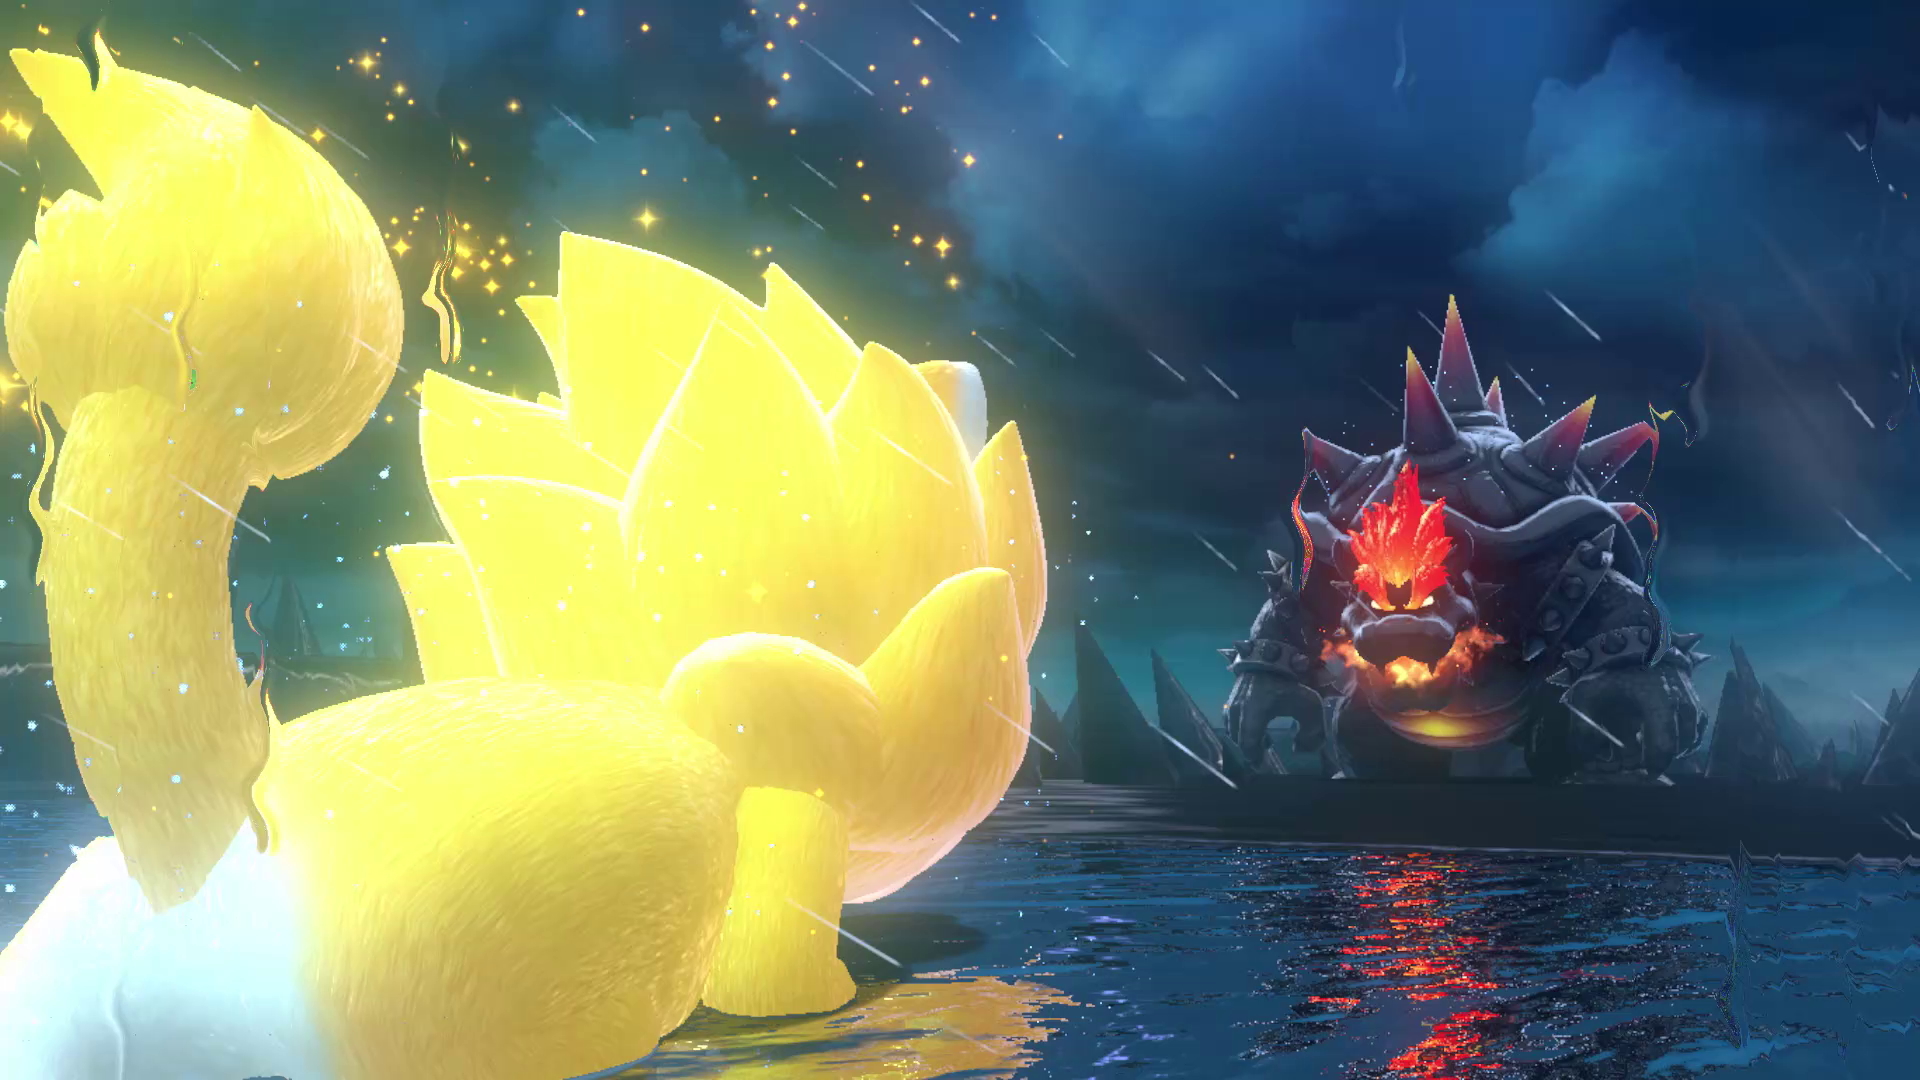 The boss battle in Bowser's Fury